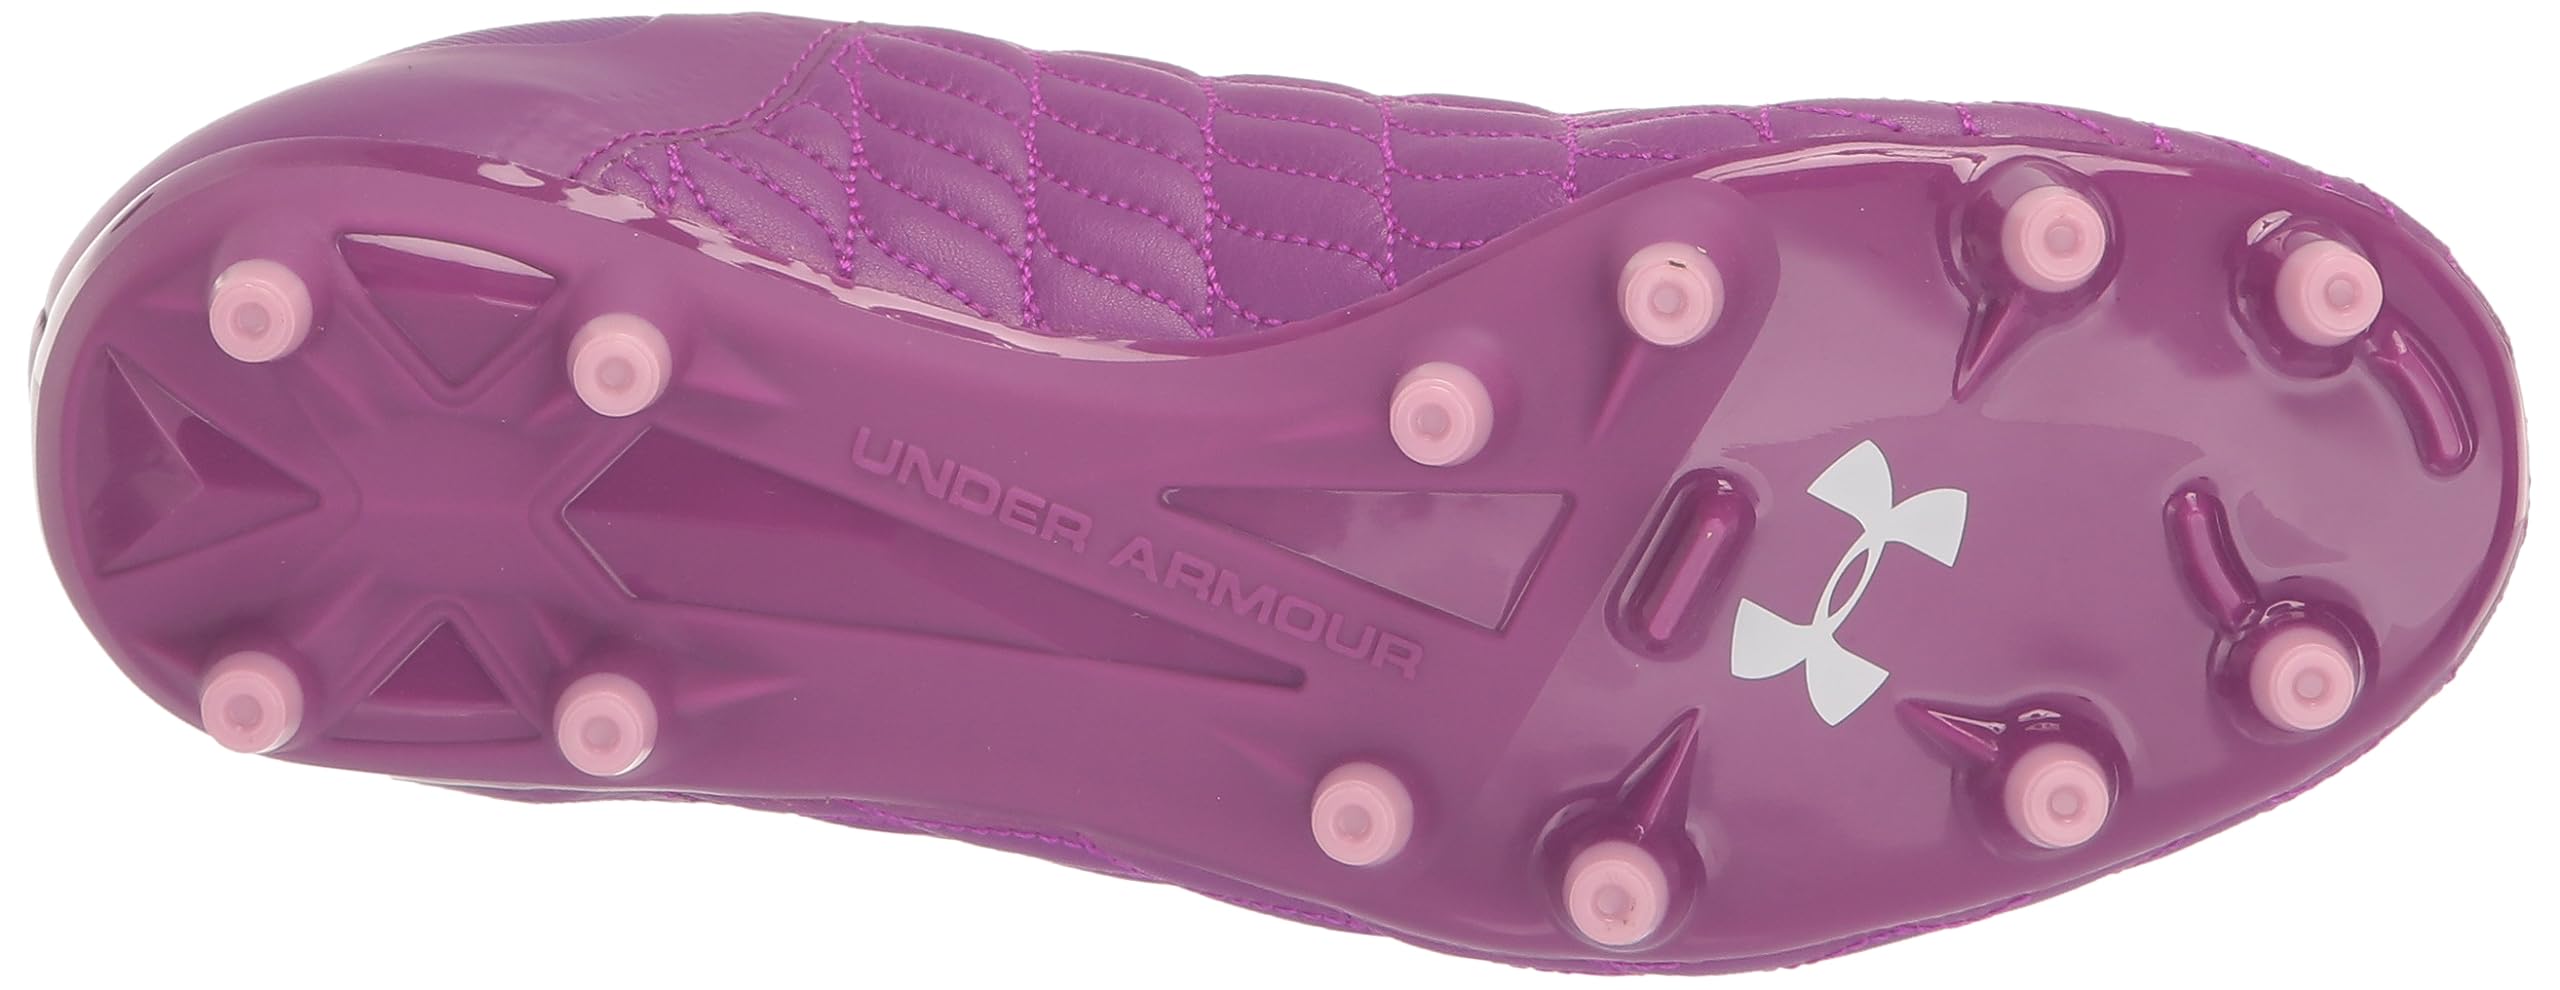 Under Armour Unisex-Adult Magnetico Select 3.0 Soccer Shoe